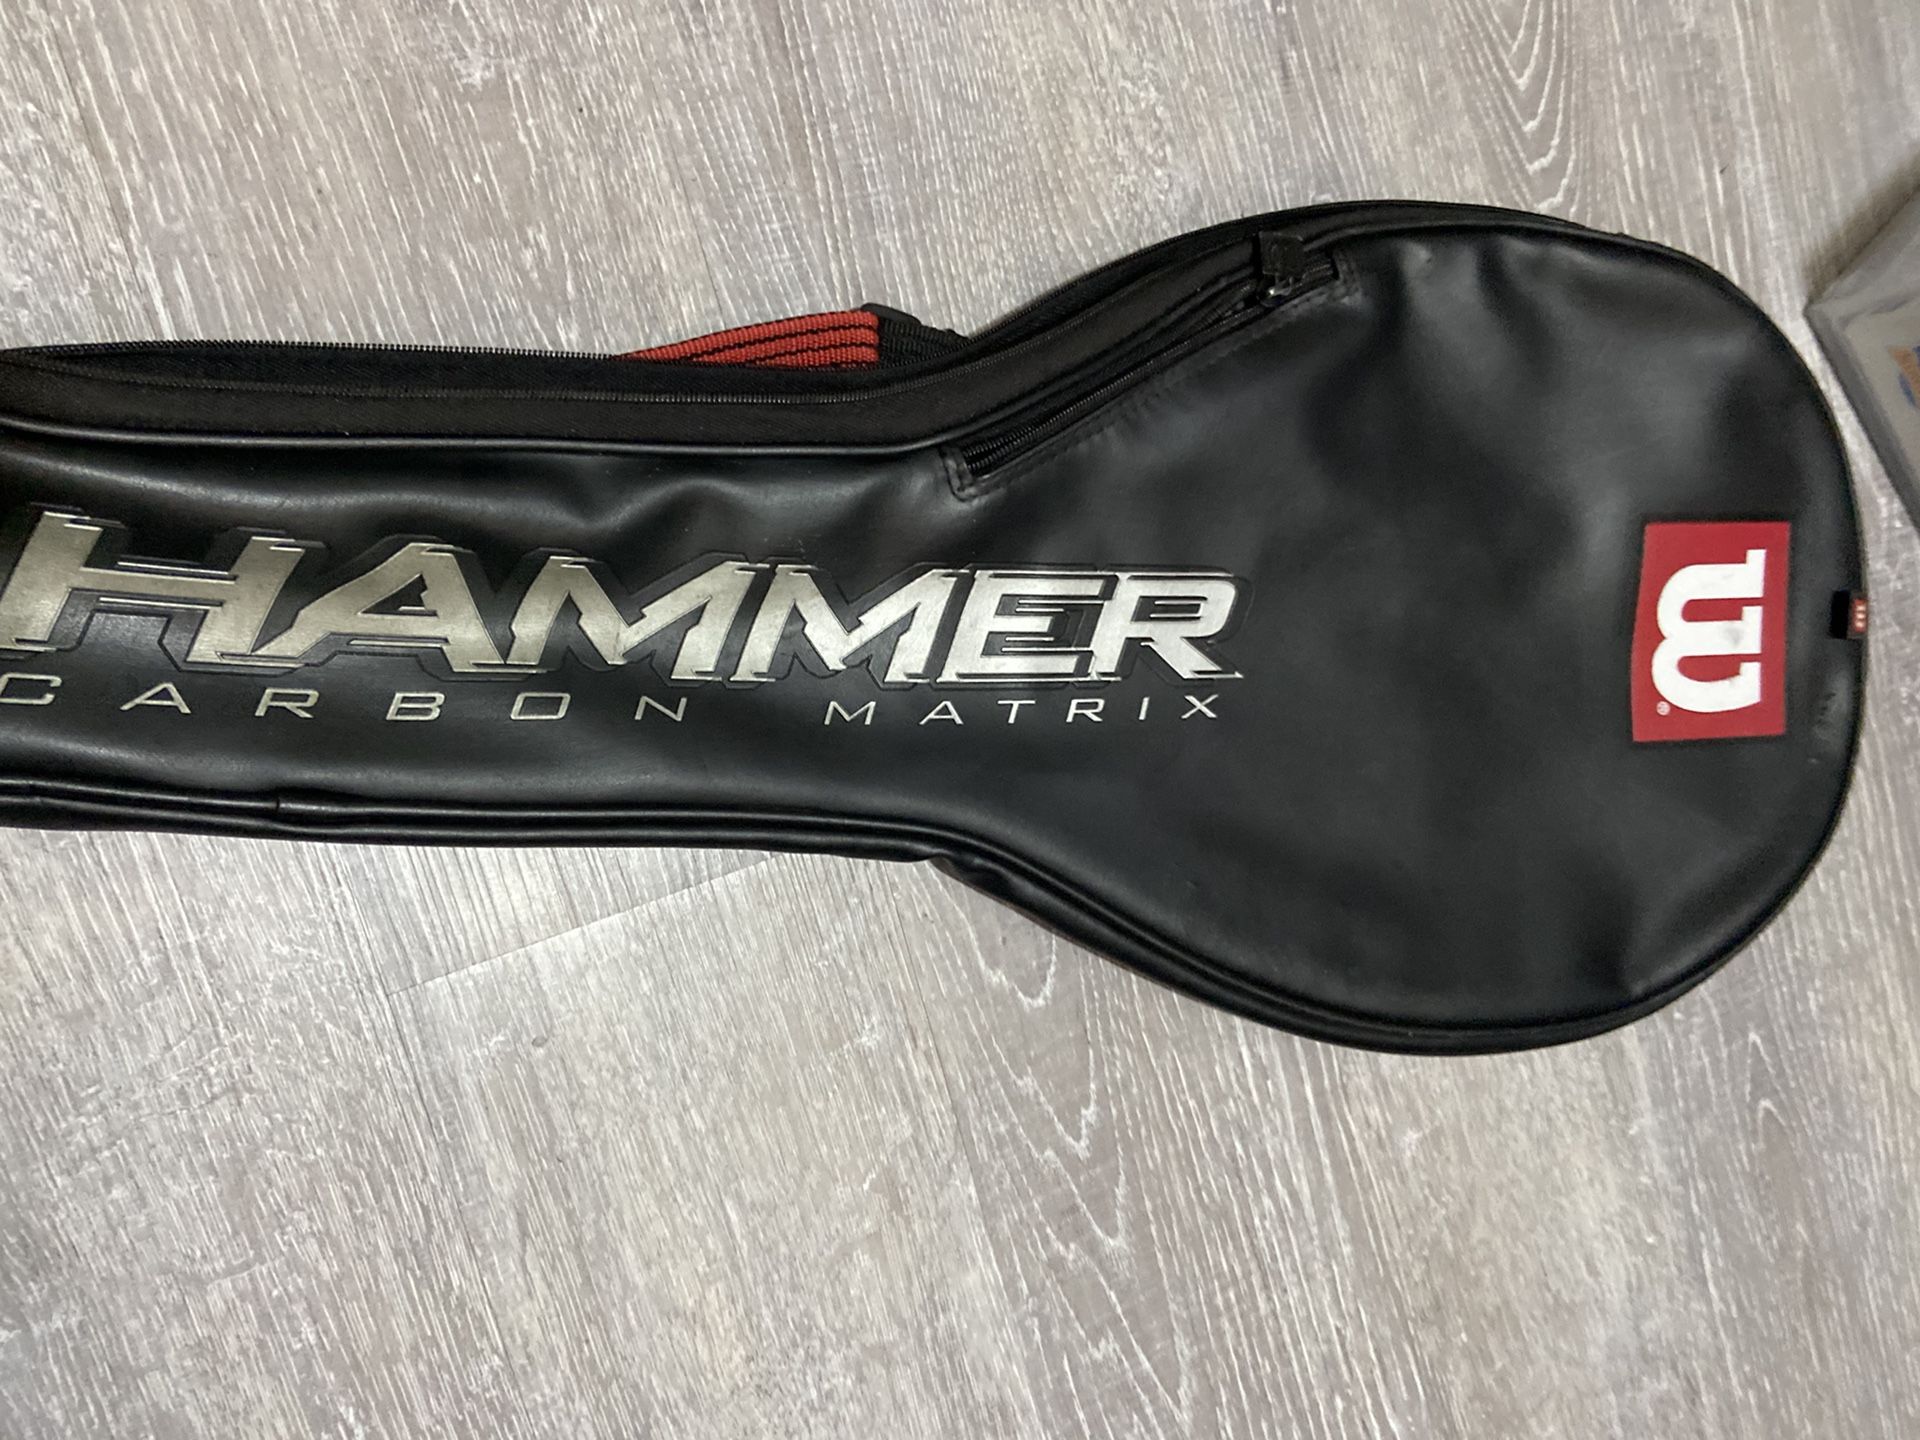 Tennis racket cover